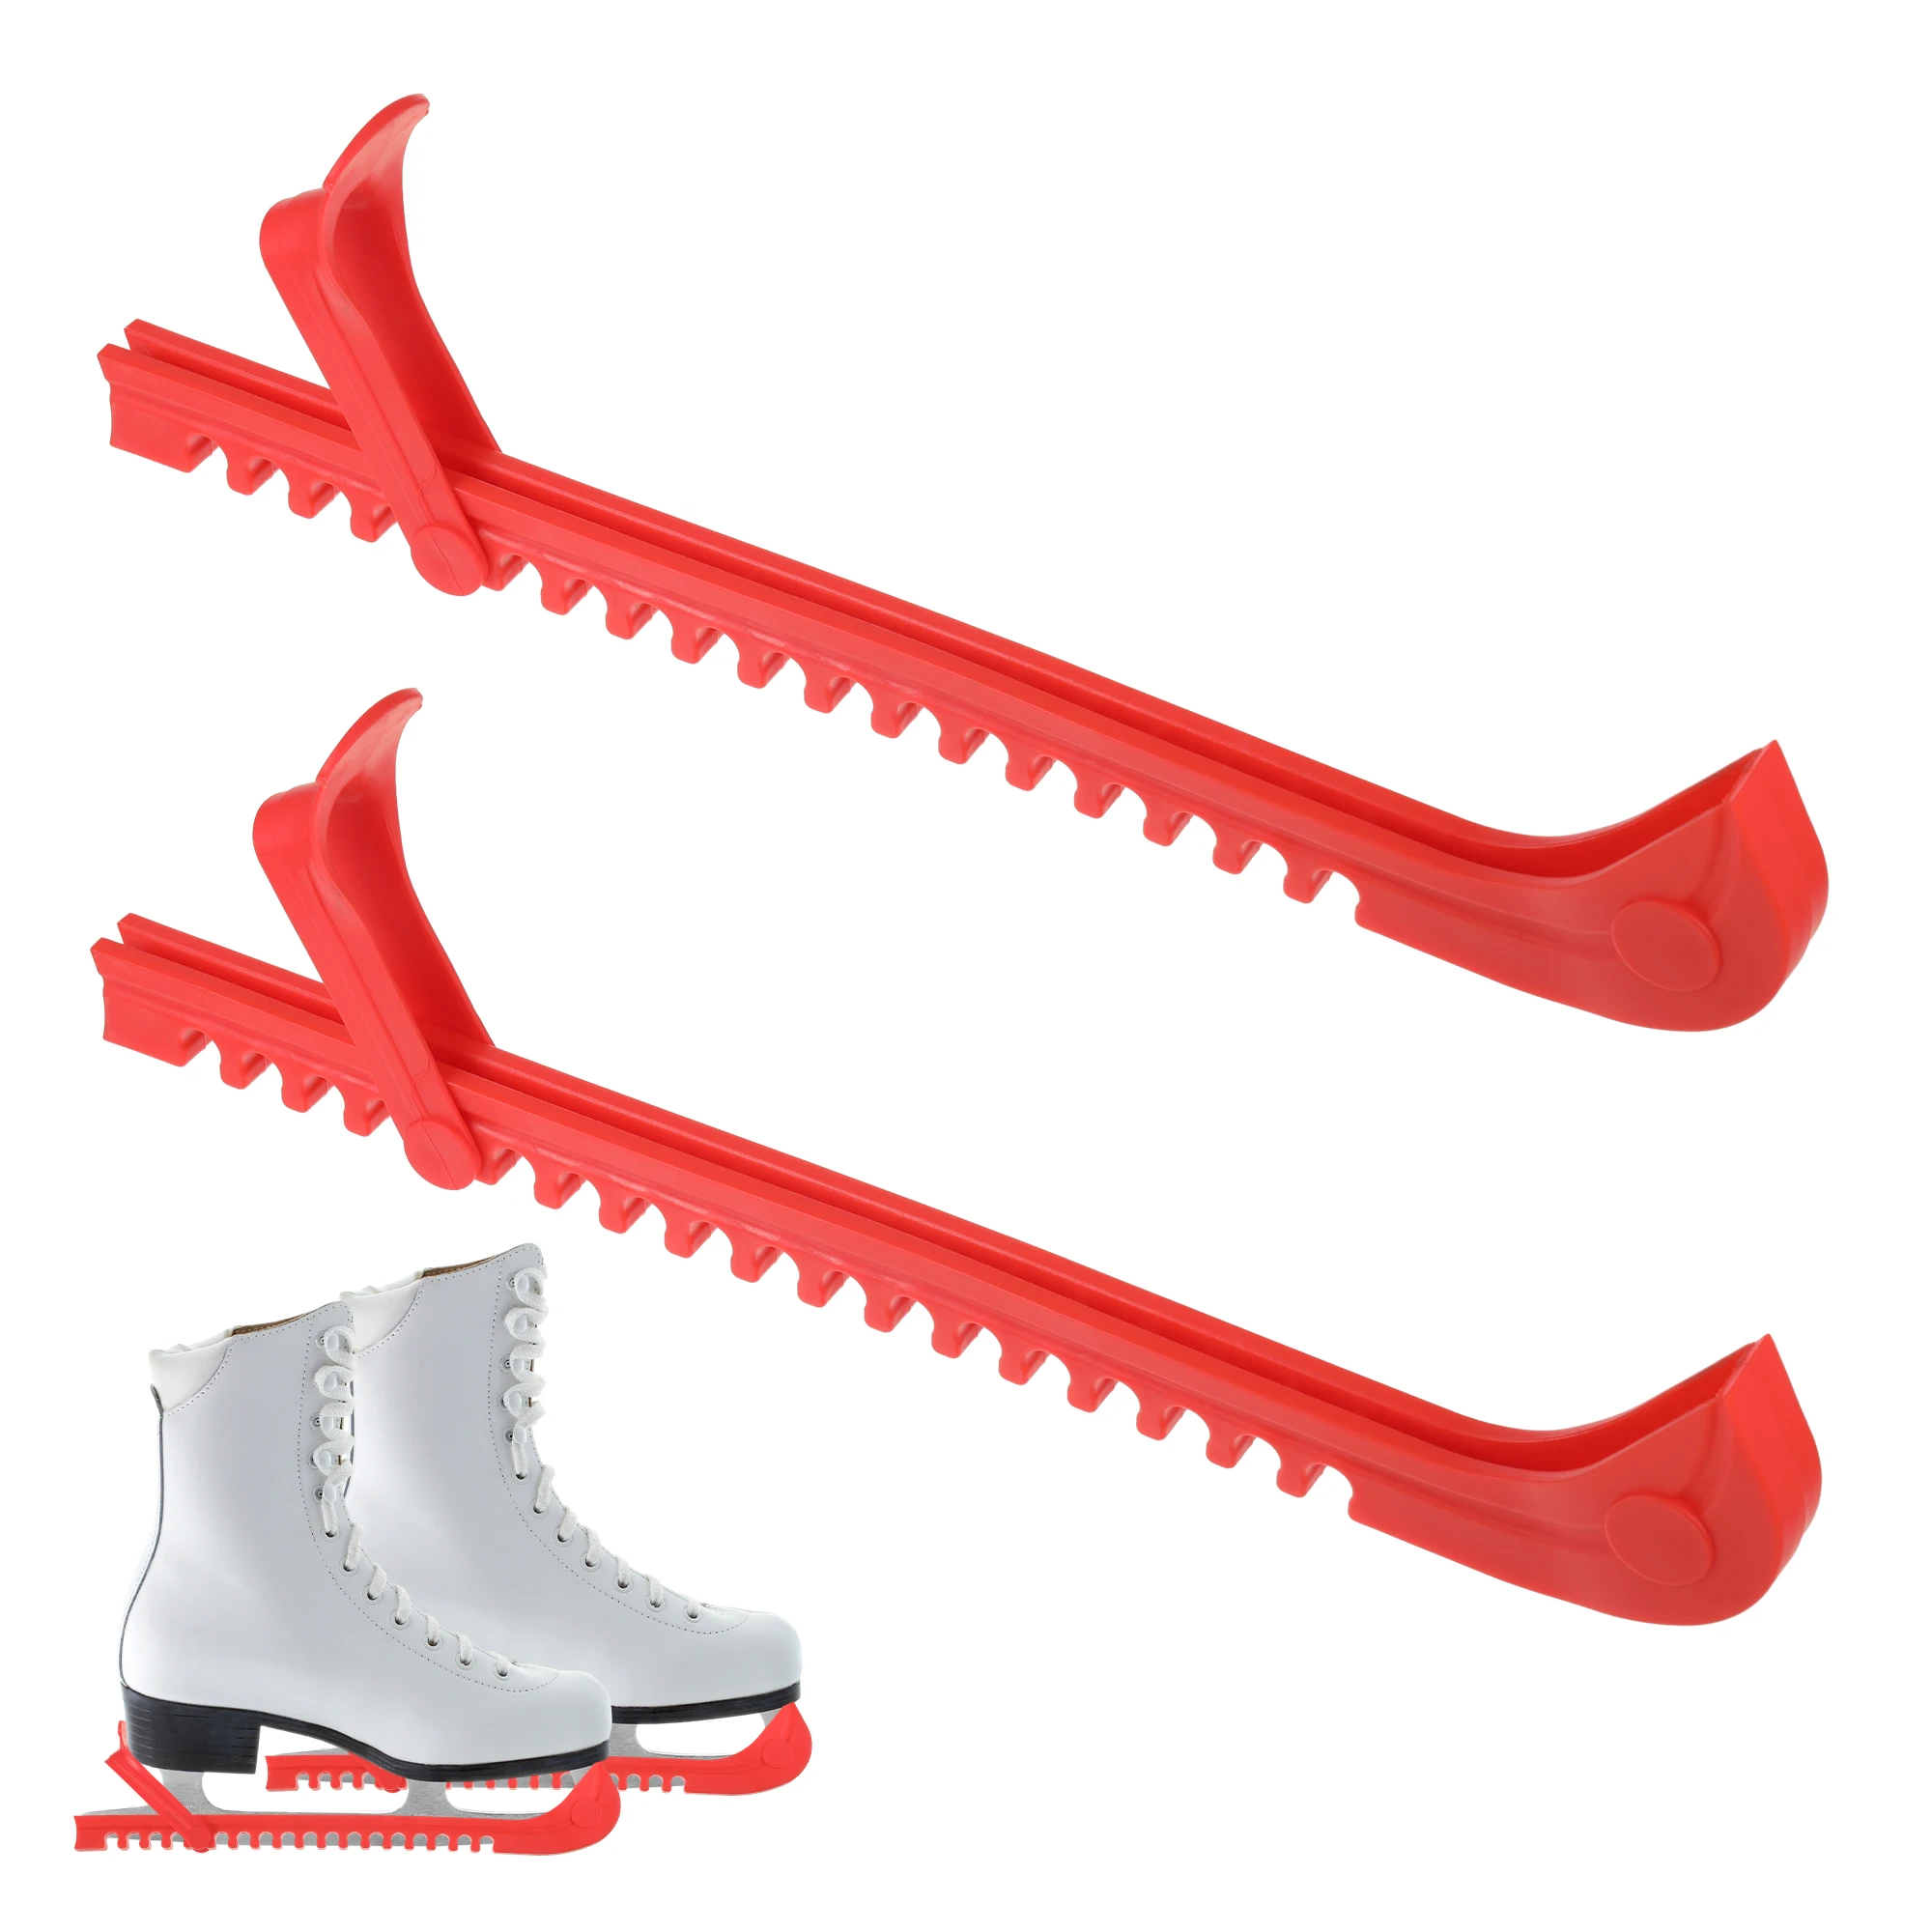 

1 Pair Soft Plastic Ice Hockey Figure Skate Blade Guard Cover Protective Non-slip Prevent Skate Shoes Protector Ice Skate Guards